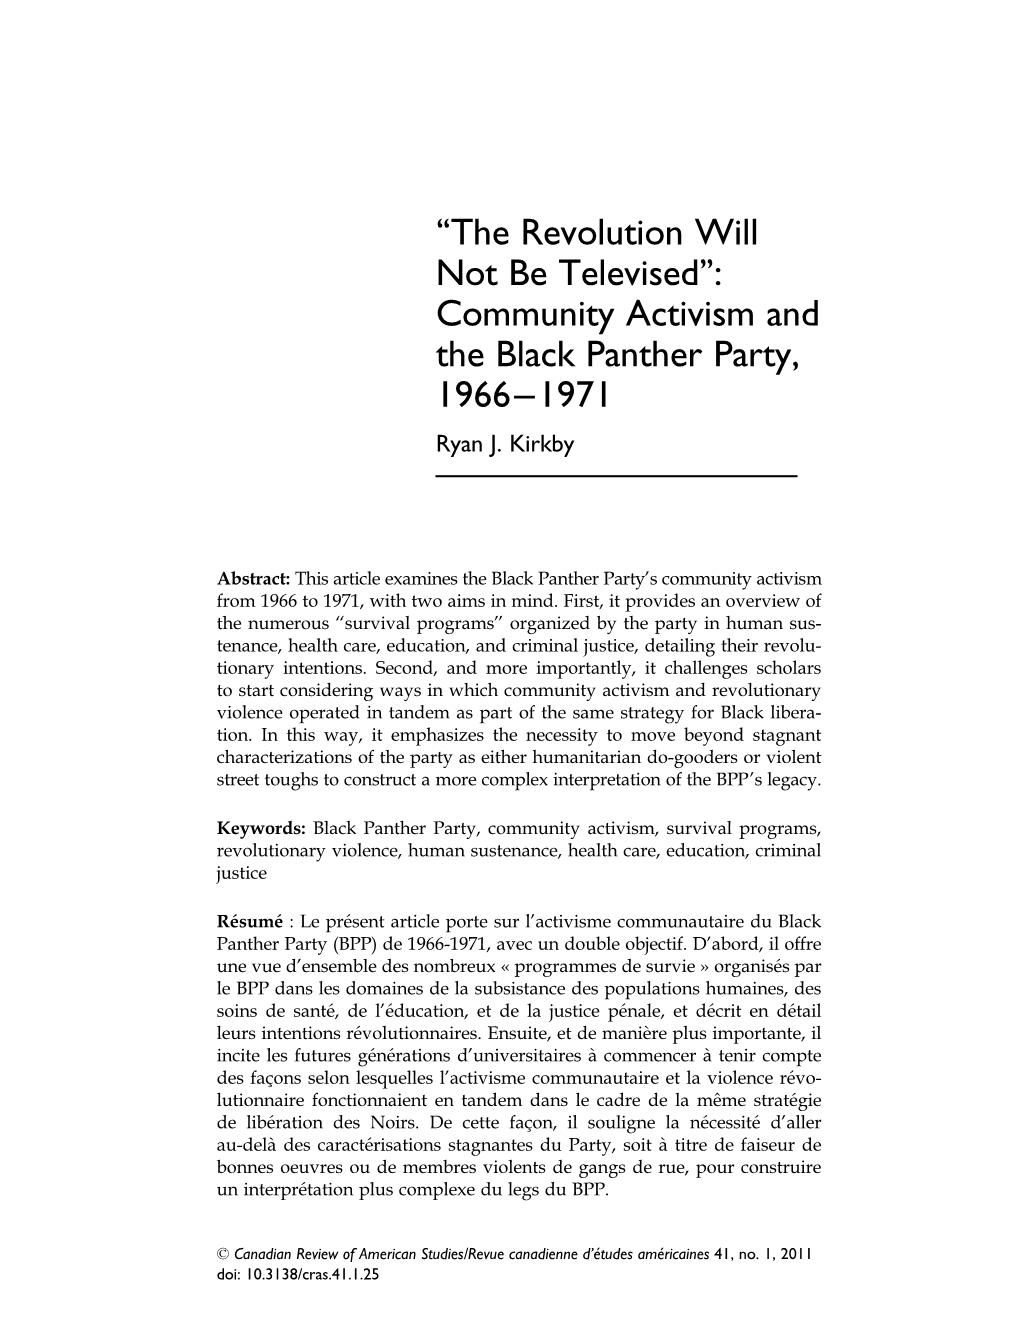 Community Activism and the Black Panther Party, 1966–1971 Ryan J